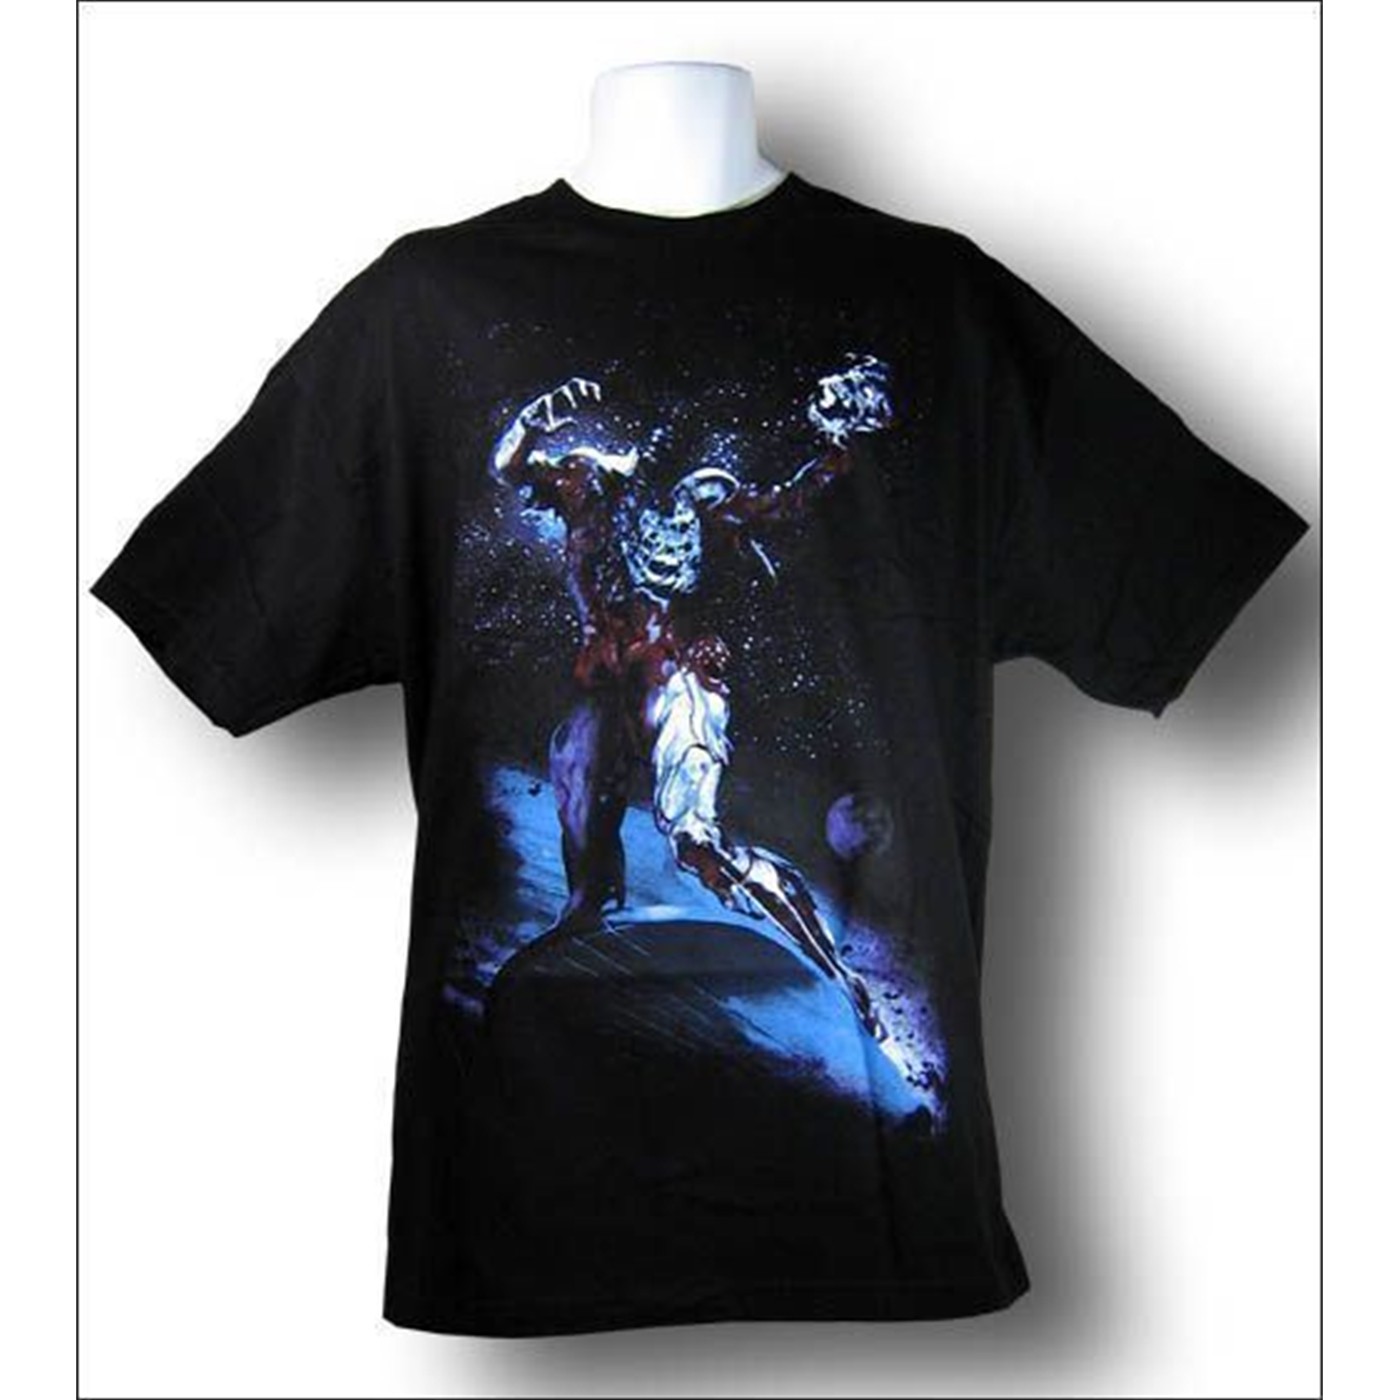 Silver Surfer Zombie T-Shirt